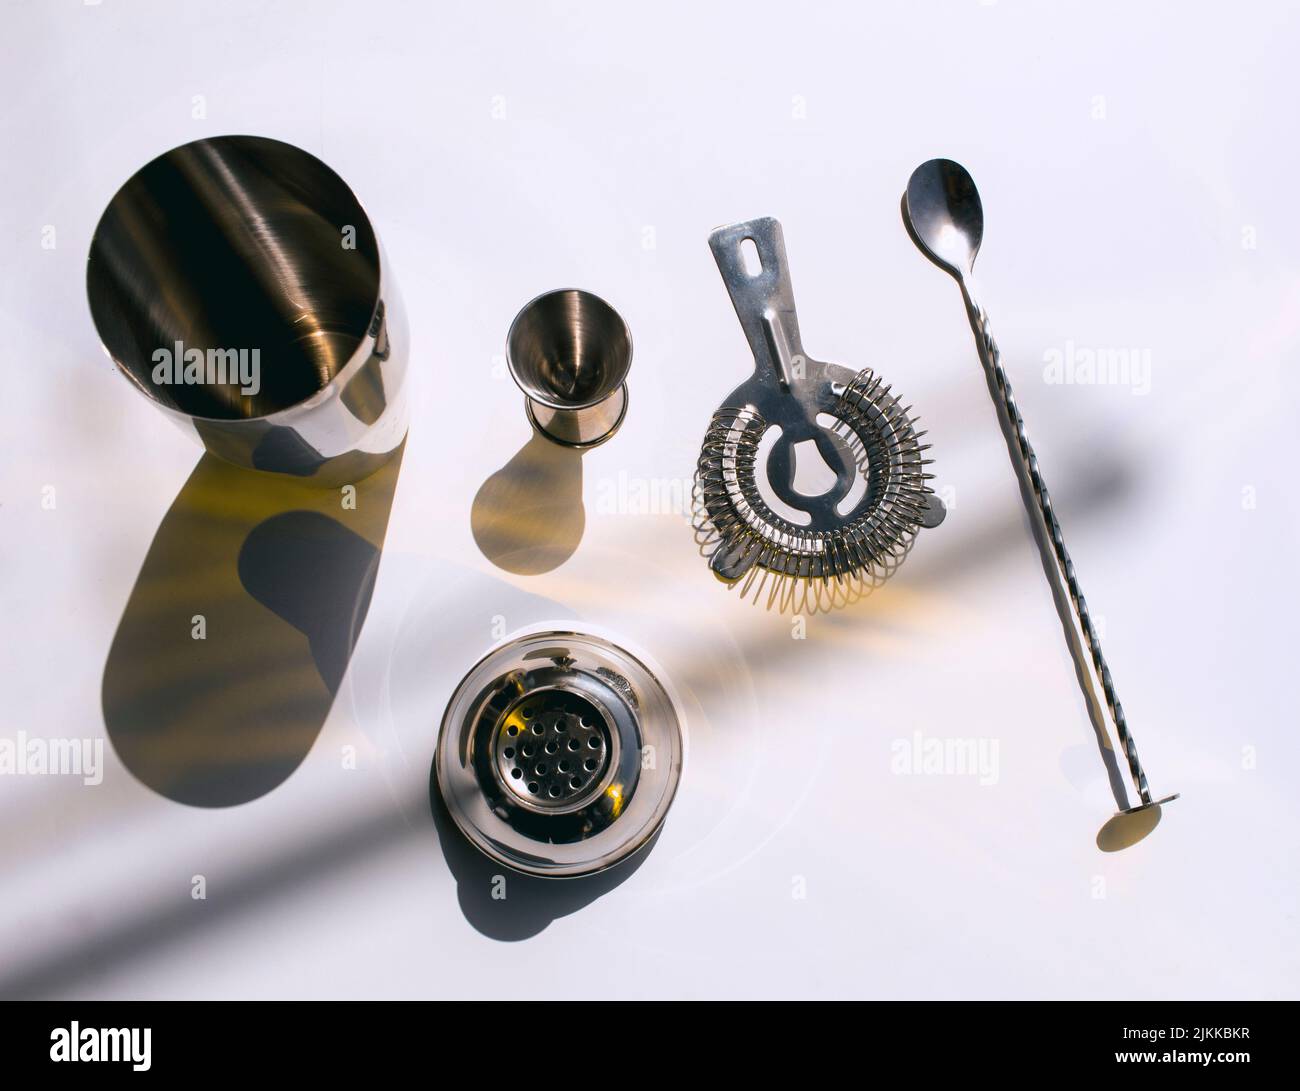 A top view of barware for making cocktails on a white background Stock Photo